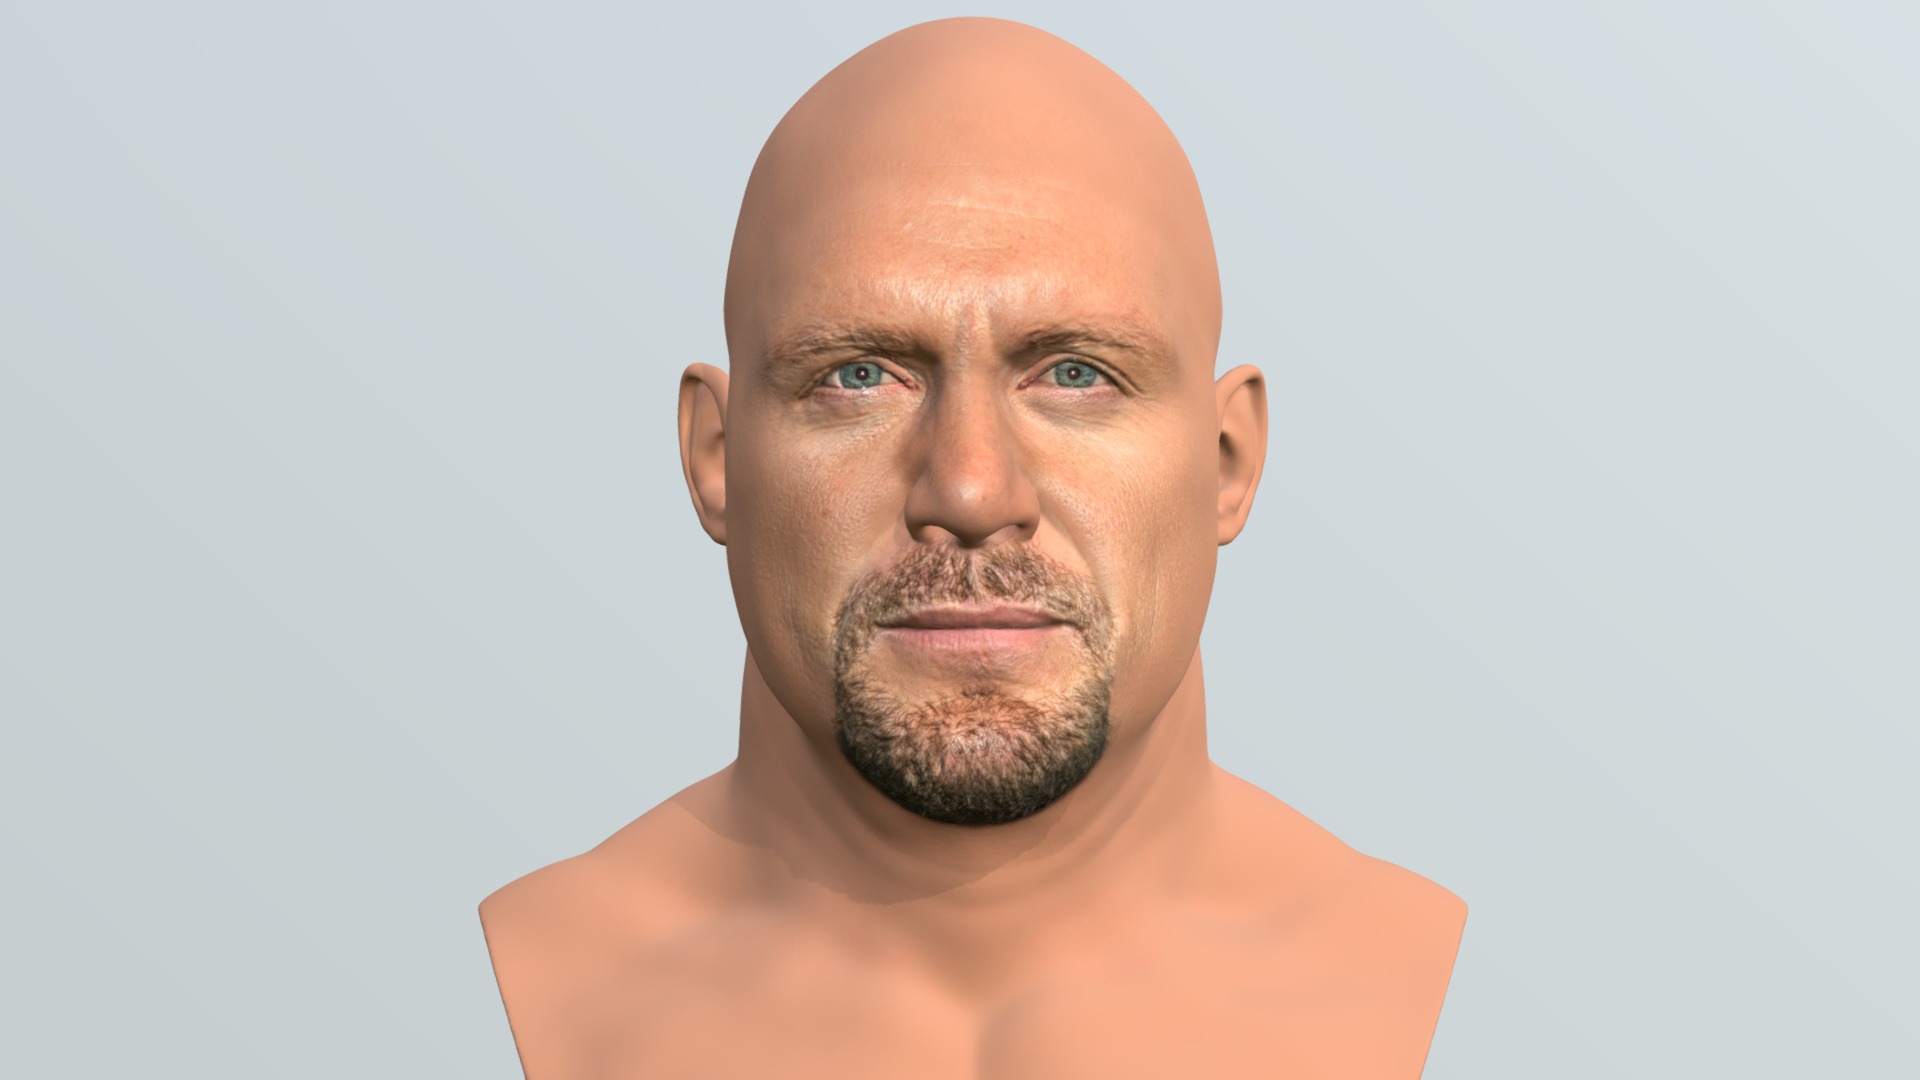 3D model Stone Cold bust for full color 3D printing - This is a 3D model of the Stone Cold bust for full color 3D printing. The 3D model is about a bald man with a beard.